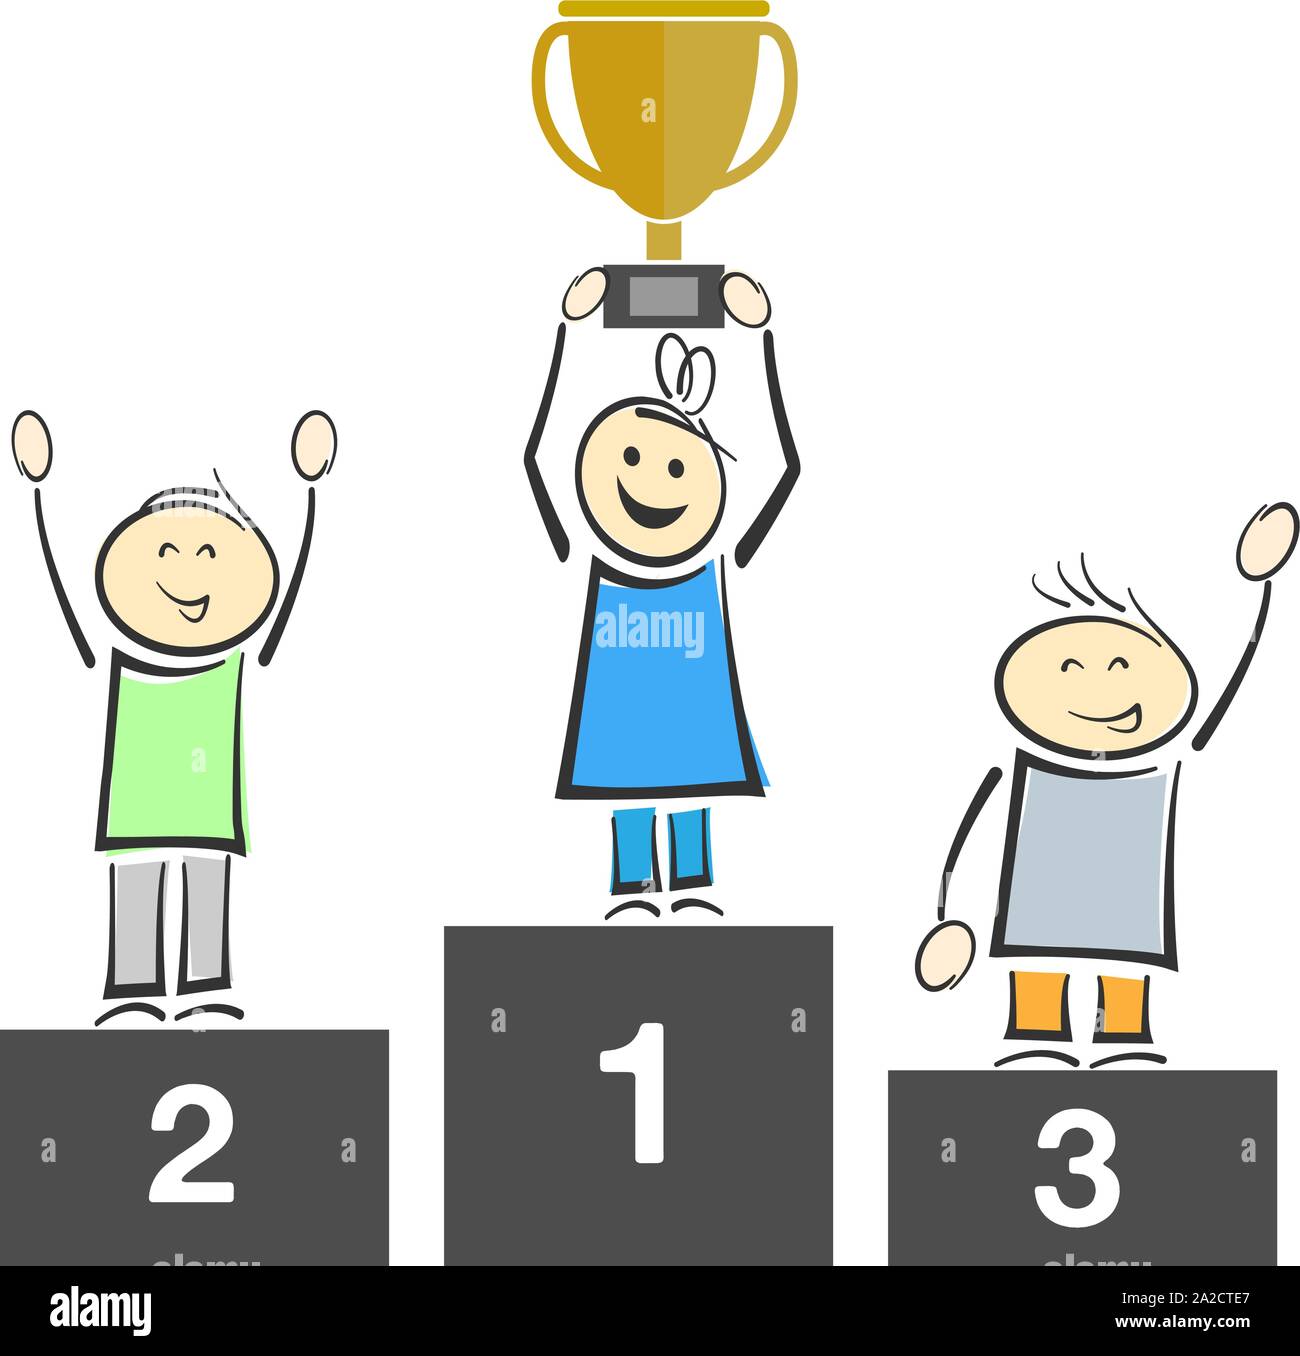 smiling stick figures on winners podium, one holding trophy vector illustration Stock Vector